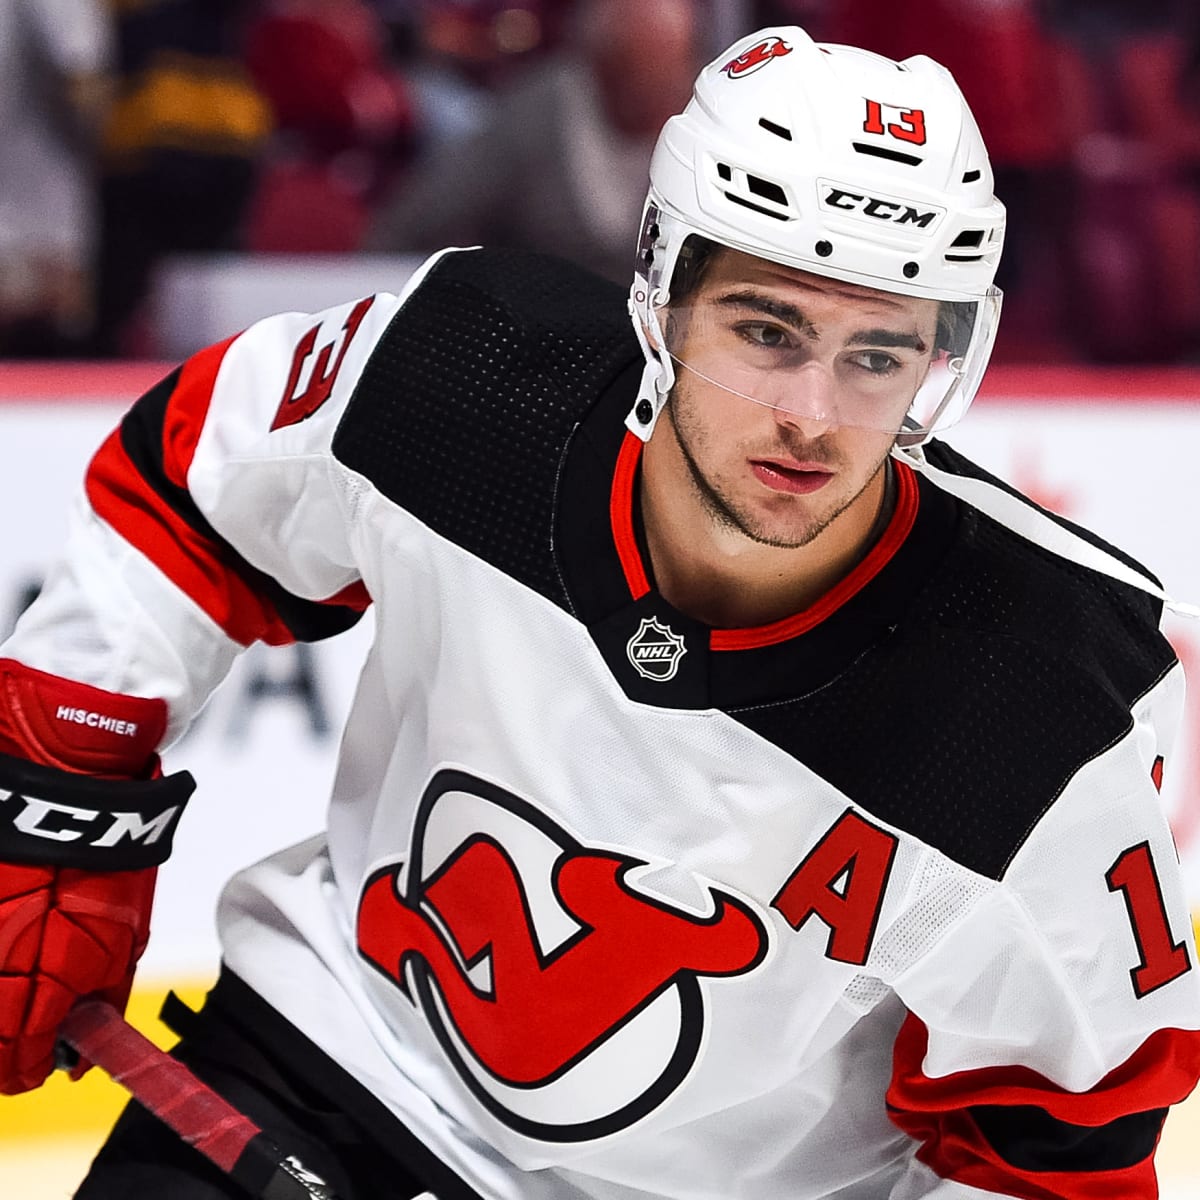 Devils select Hischier at No. 1